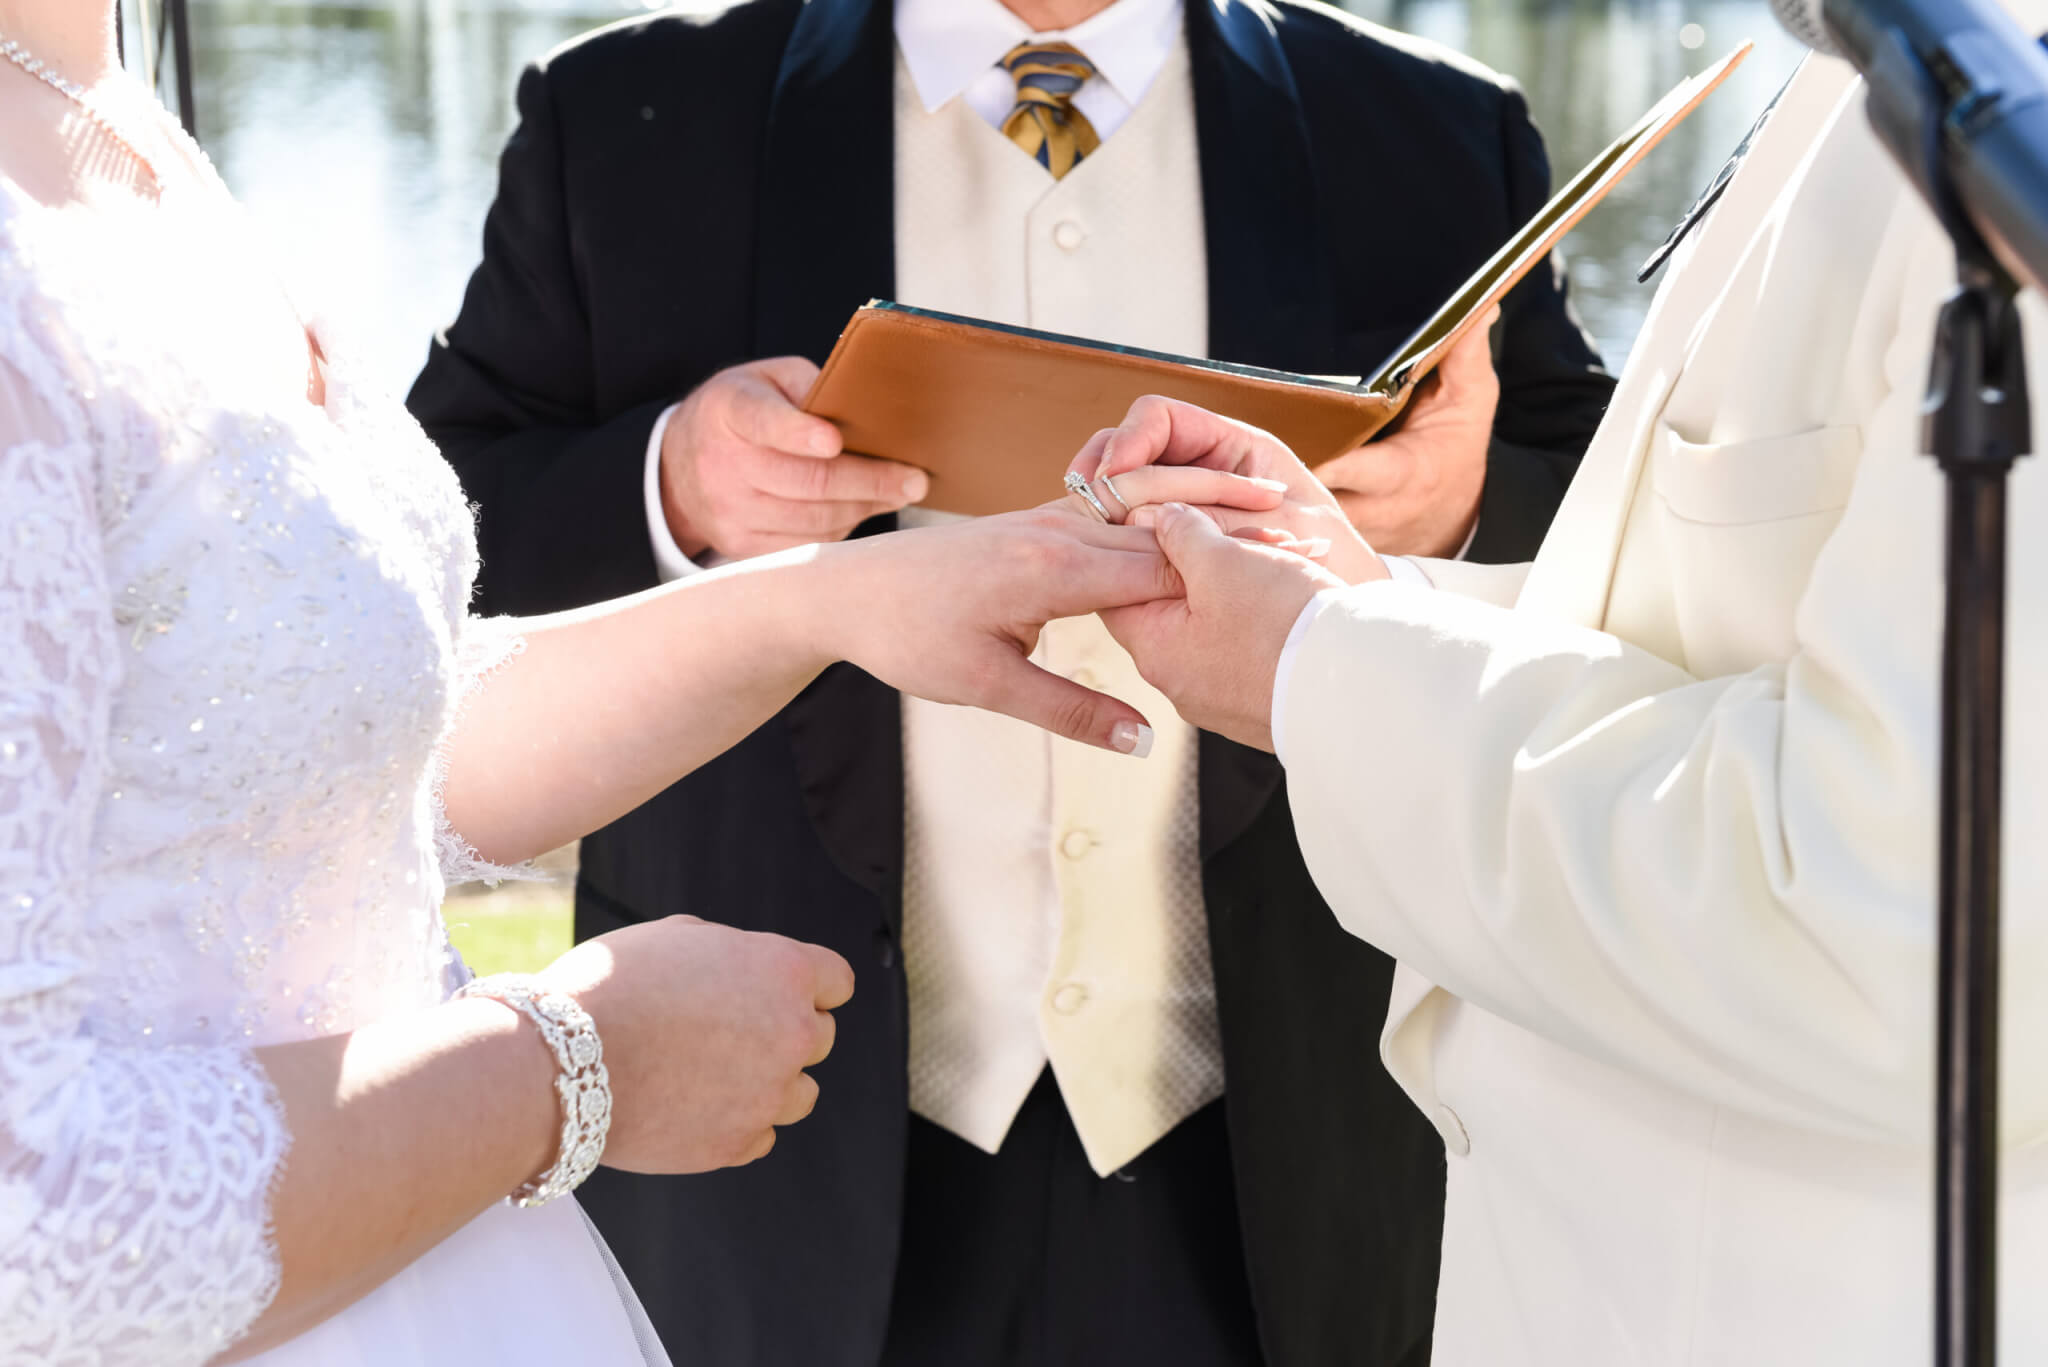 New State Law Allows Non-Ordained Friends and Family to Officiate Weddings